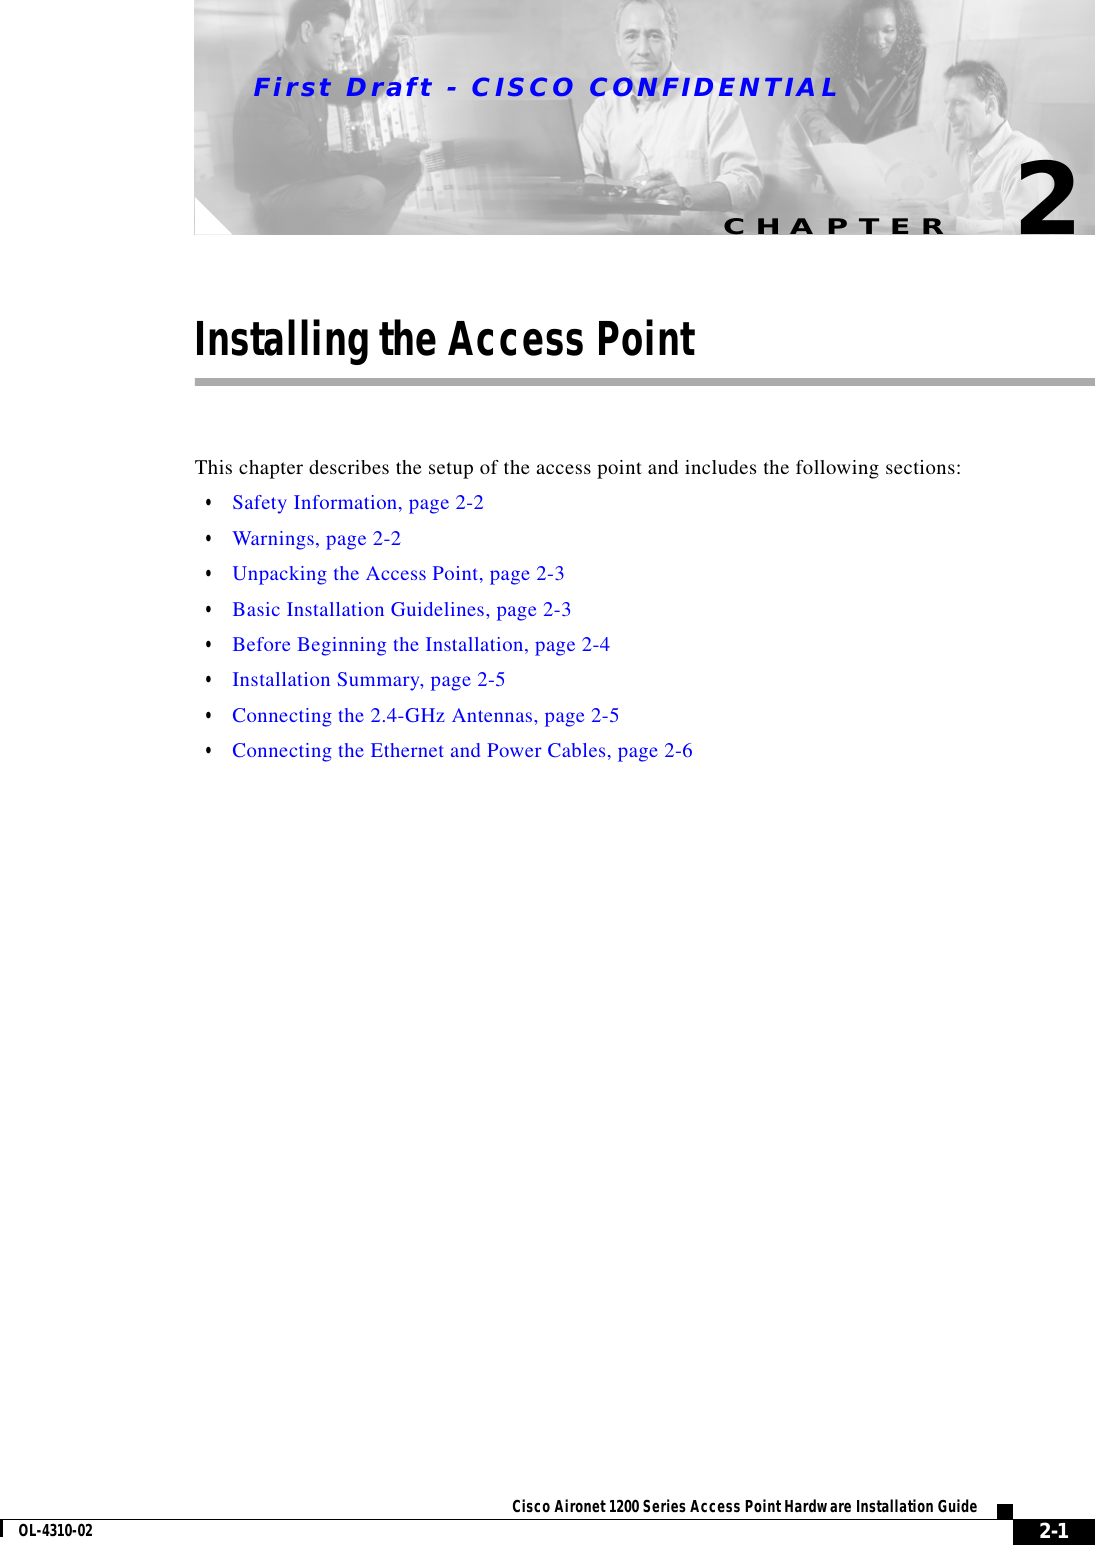 CHAPTERFirst Draft - CISCO CONFIDENTIAL2-1Cisco Aironet 1200 Series Access Point Hardware Installation GuideOL-4310-022Installing the Access PointThis chapter describes the setup of the access point and includes the following sections:•Safety Information, page 2-2•Warnings, page 2-2•Unpacking the Access Point, page 2-3•Basic Installation Guidelines, page 2-3•Before Beginning the Installation, page 2-4•Installation Summary, page 2-5•Connecting the 2.4-GHz Antennas, page 2-5•Connecting the Ethernet and Power Cables, page 2-6